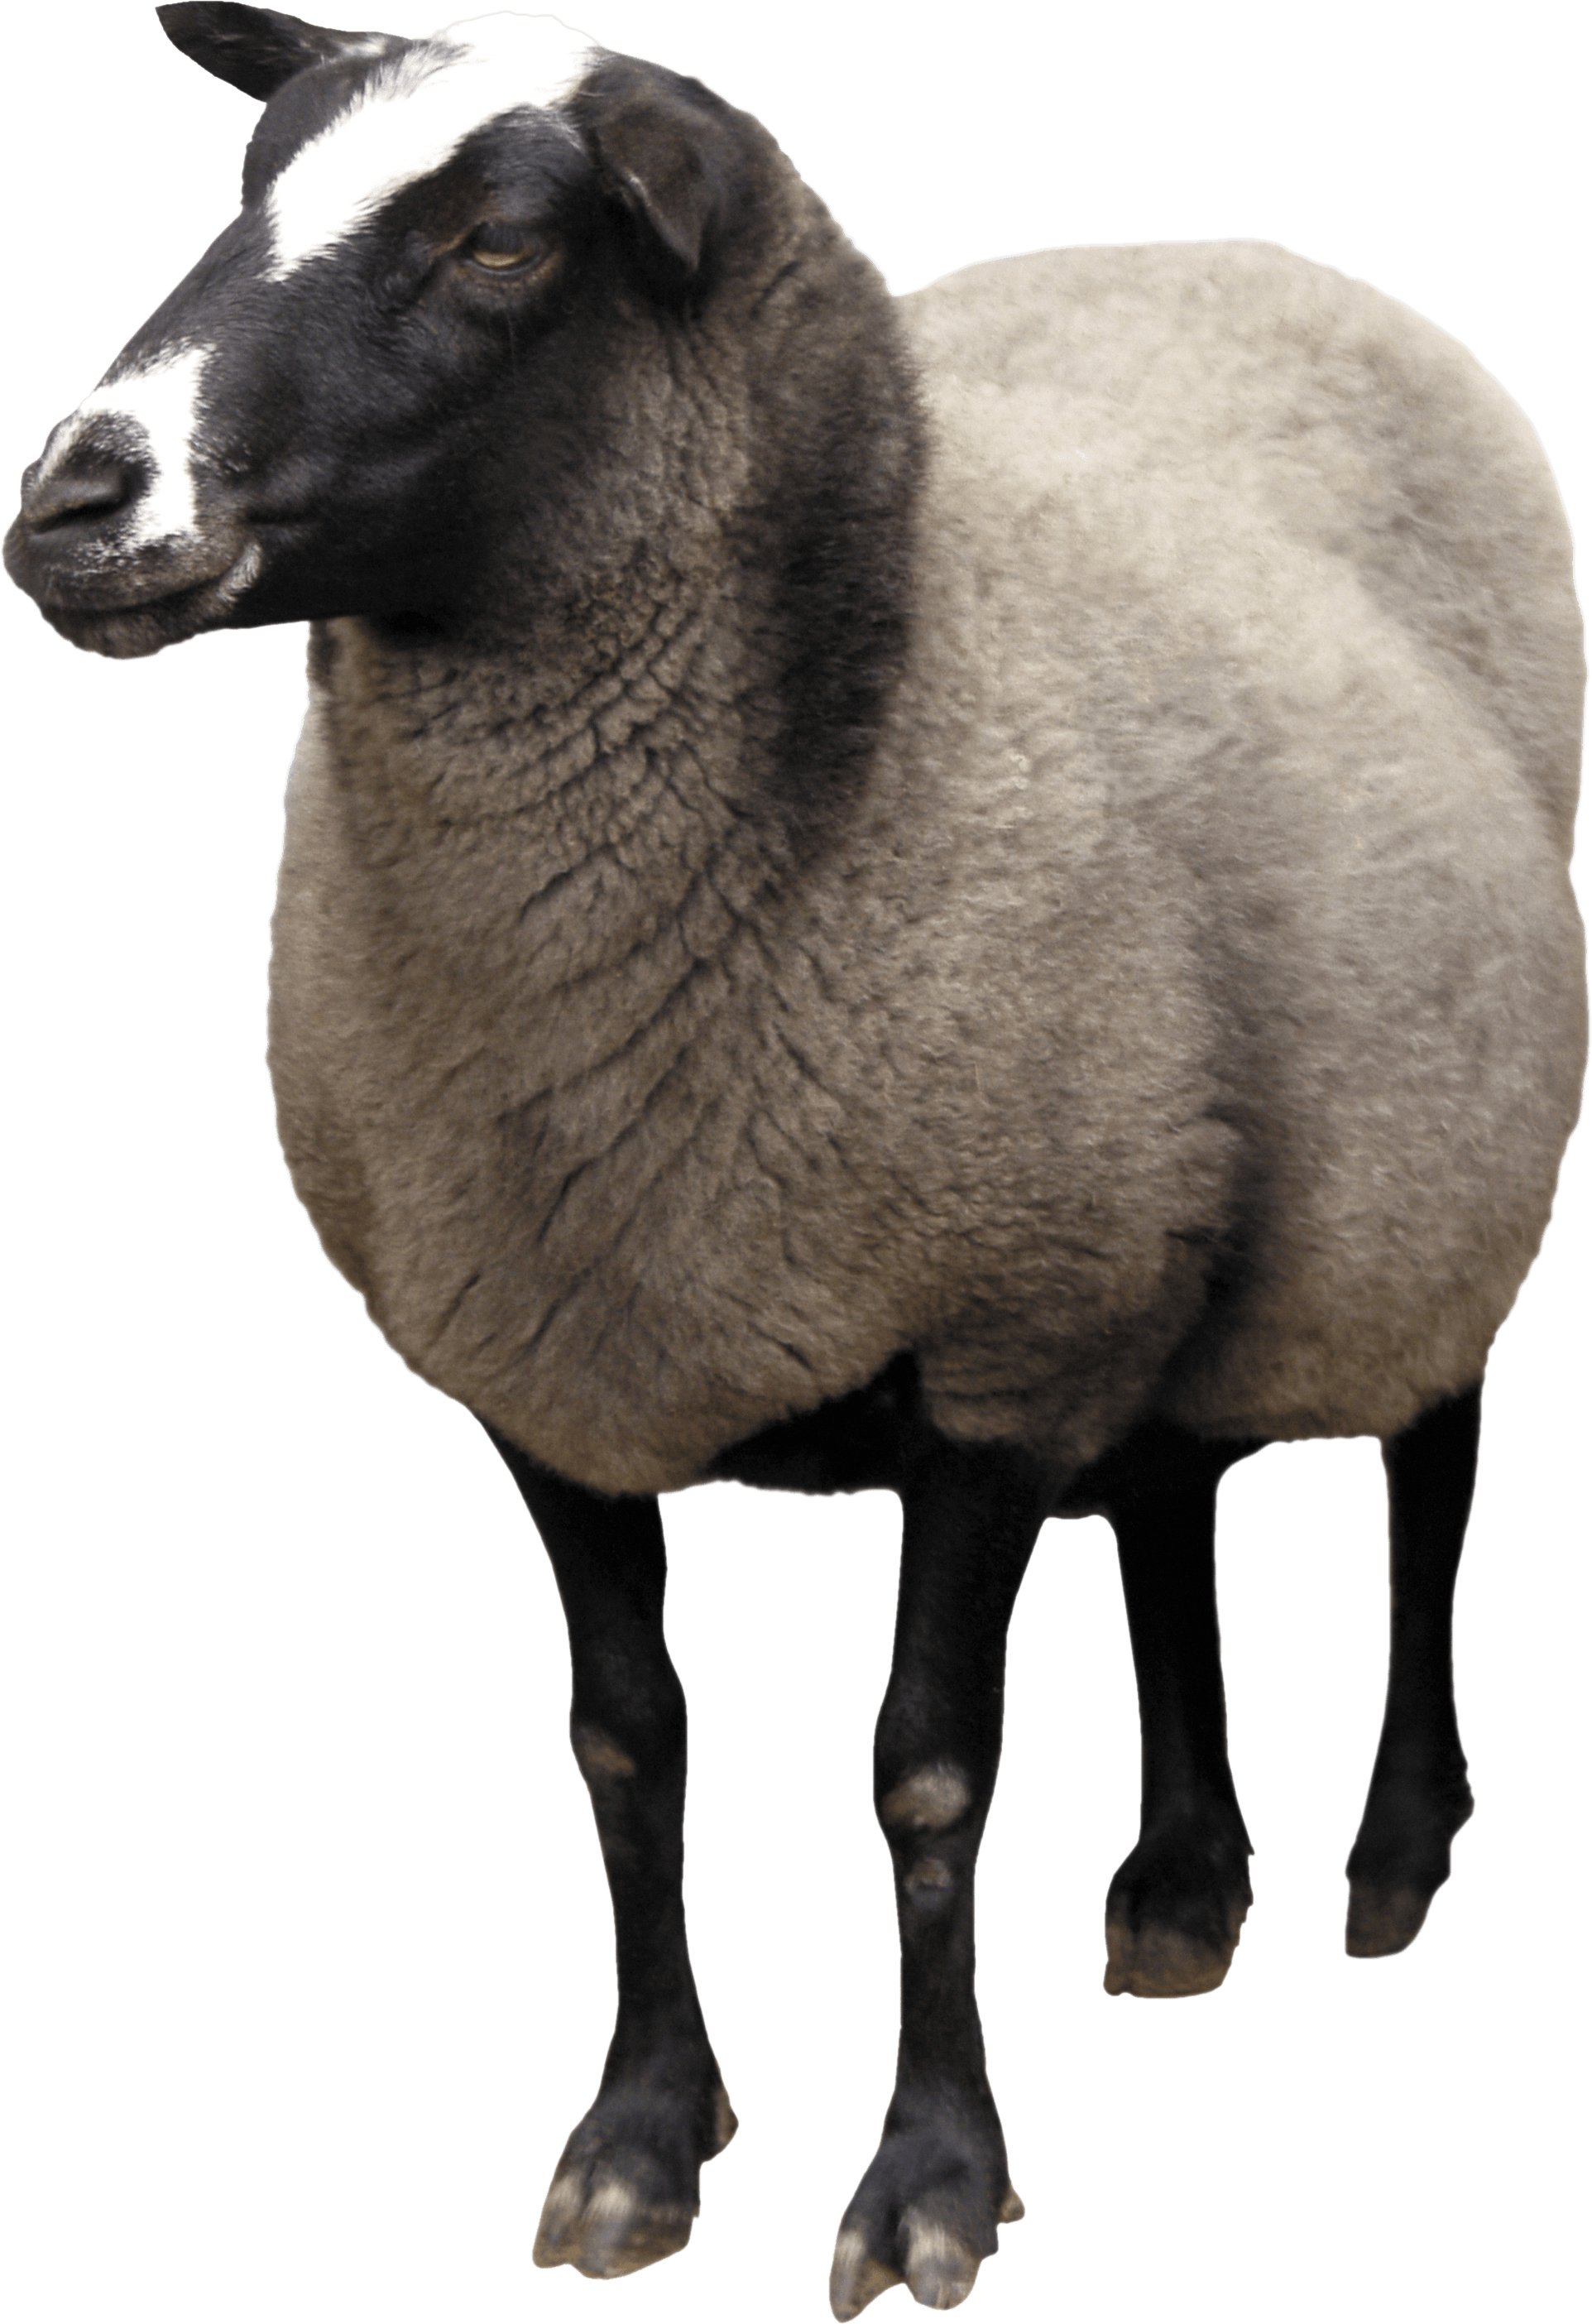 Sheep Png Transparent Images Sheep Clipart Large Size Png Image ...